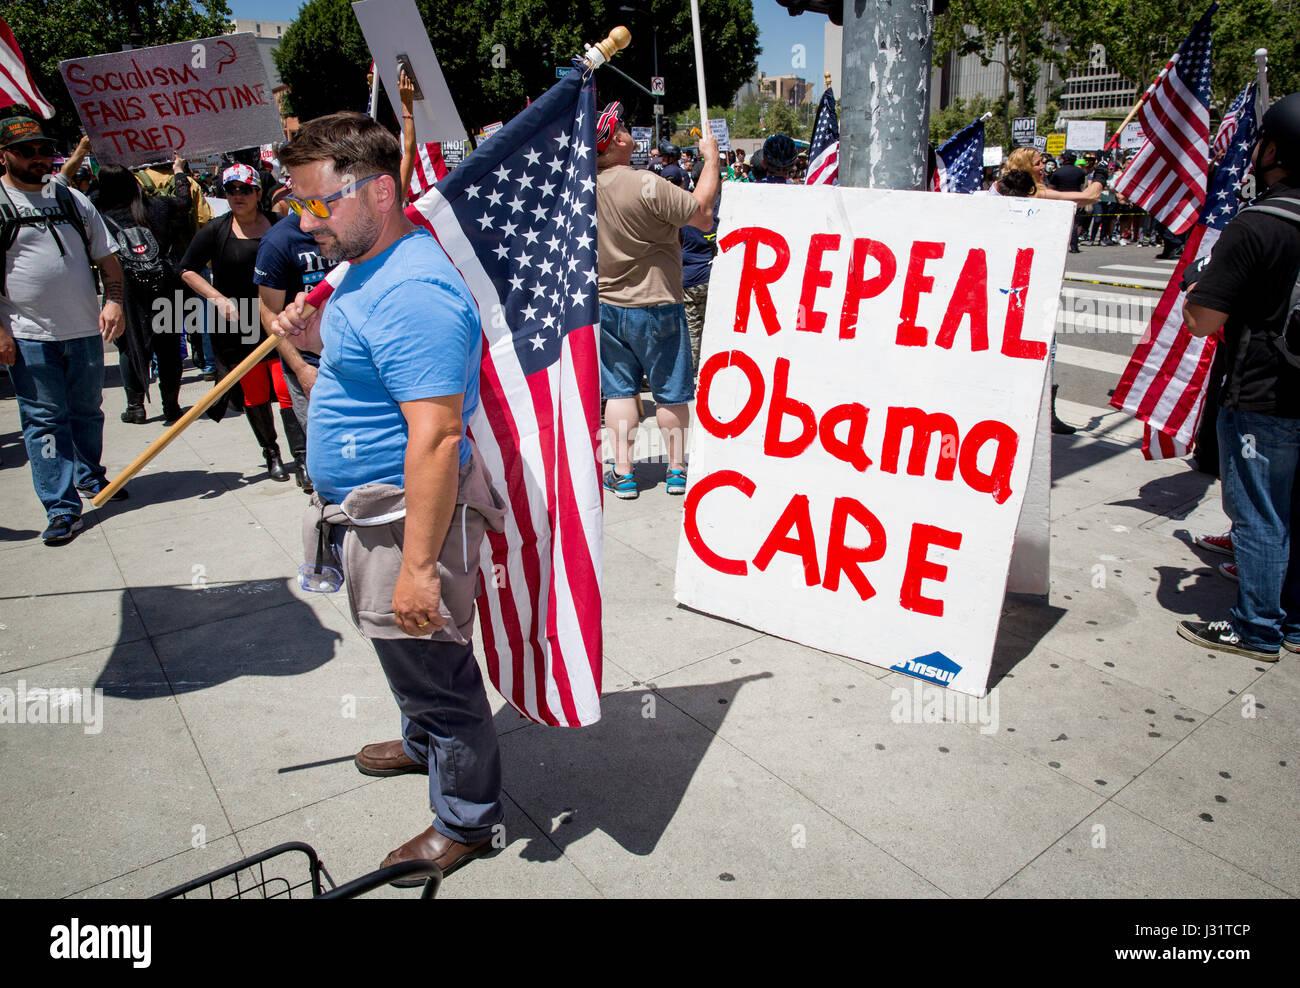 Los Angeles, USA. 1st May, 2017. Donald Trump supporters at May Day rally in Downtown Los Angeles, California, May 1st, 2017. Large sign reads, 'Repeal Obamacare.' Credit: Jim Newberry/Alamy Live News Stock Photo